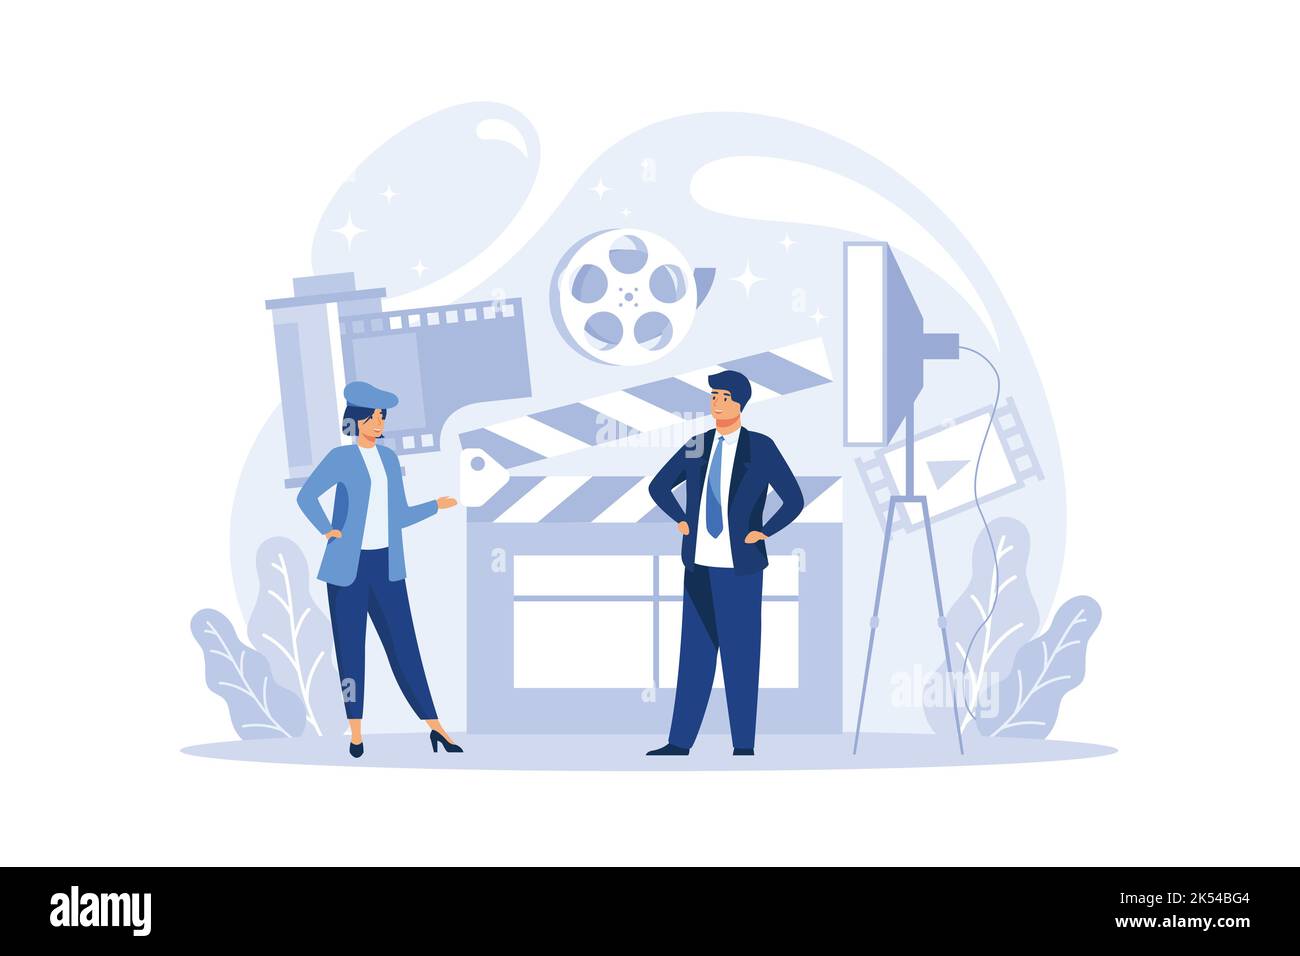 Producer concept illustration. Film and tv production. Idea of creative people and profession. Studio equipment. Isolated vector illustration Stock Vector